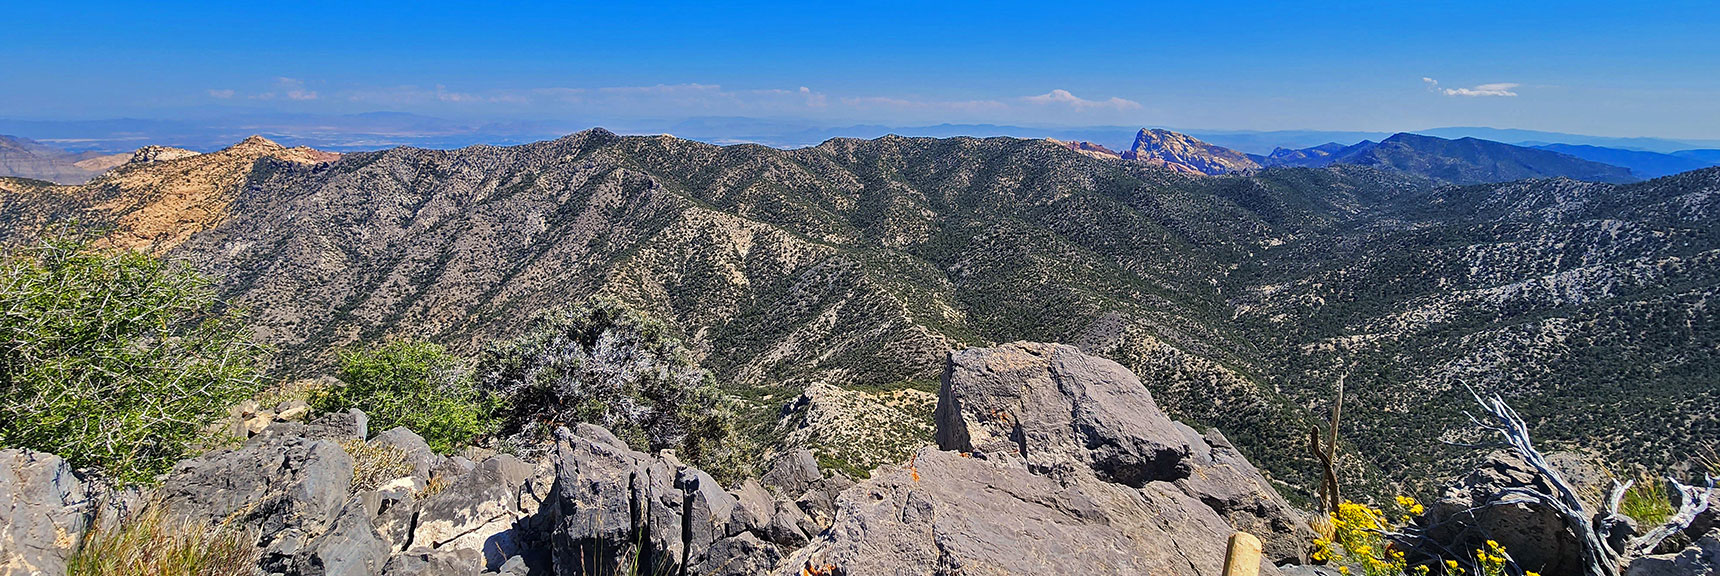 Portion of Rainbow Mt. Access Ridge with Mt. Wilson Background. | Red Rock Summit | Lovell Canyon & Rainbow Mountain Wilderness, Nevada